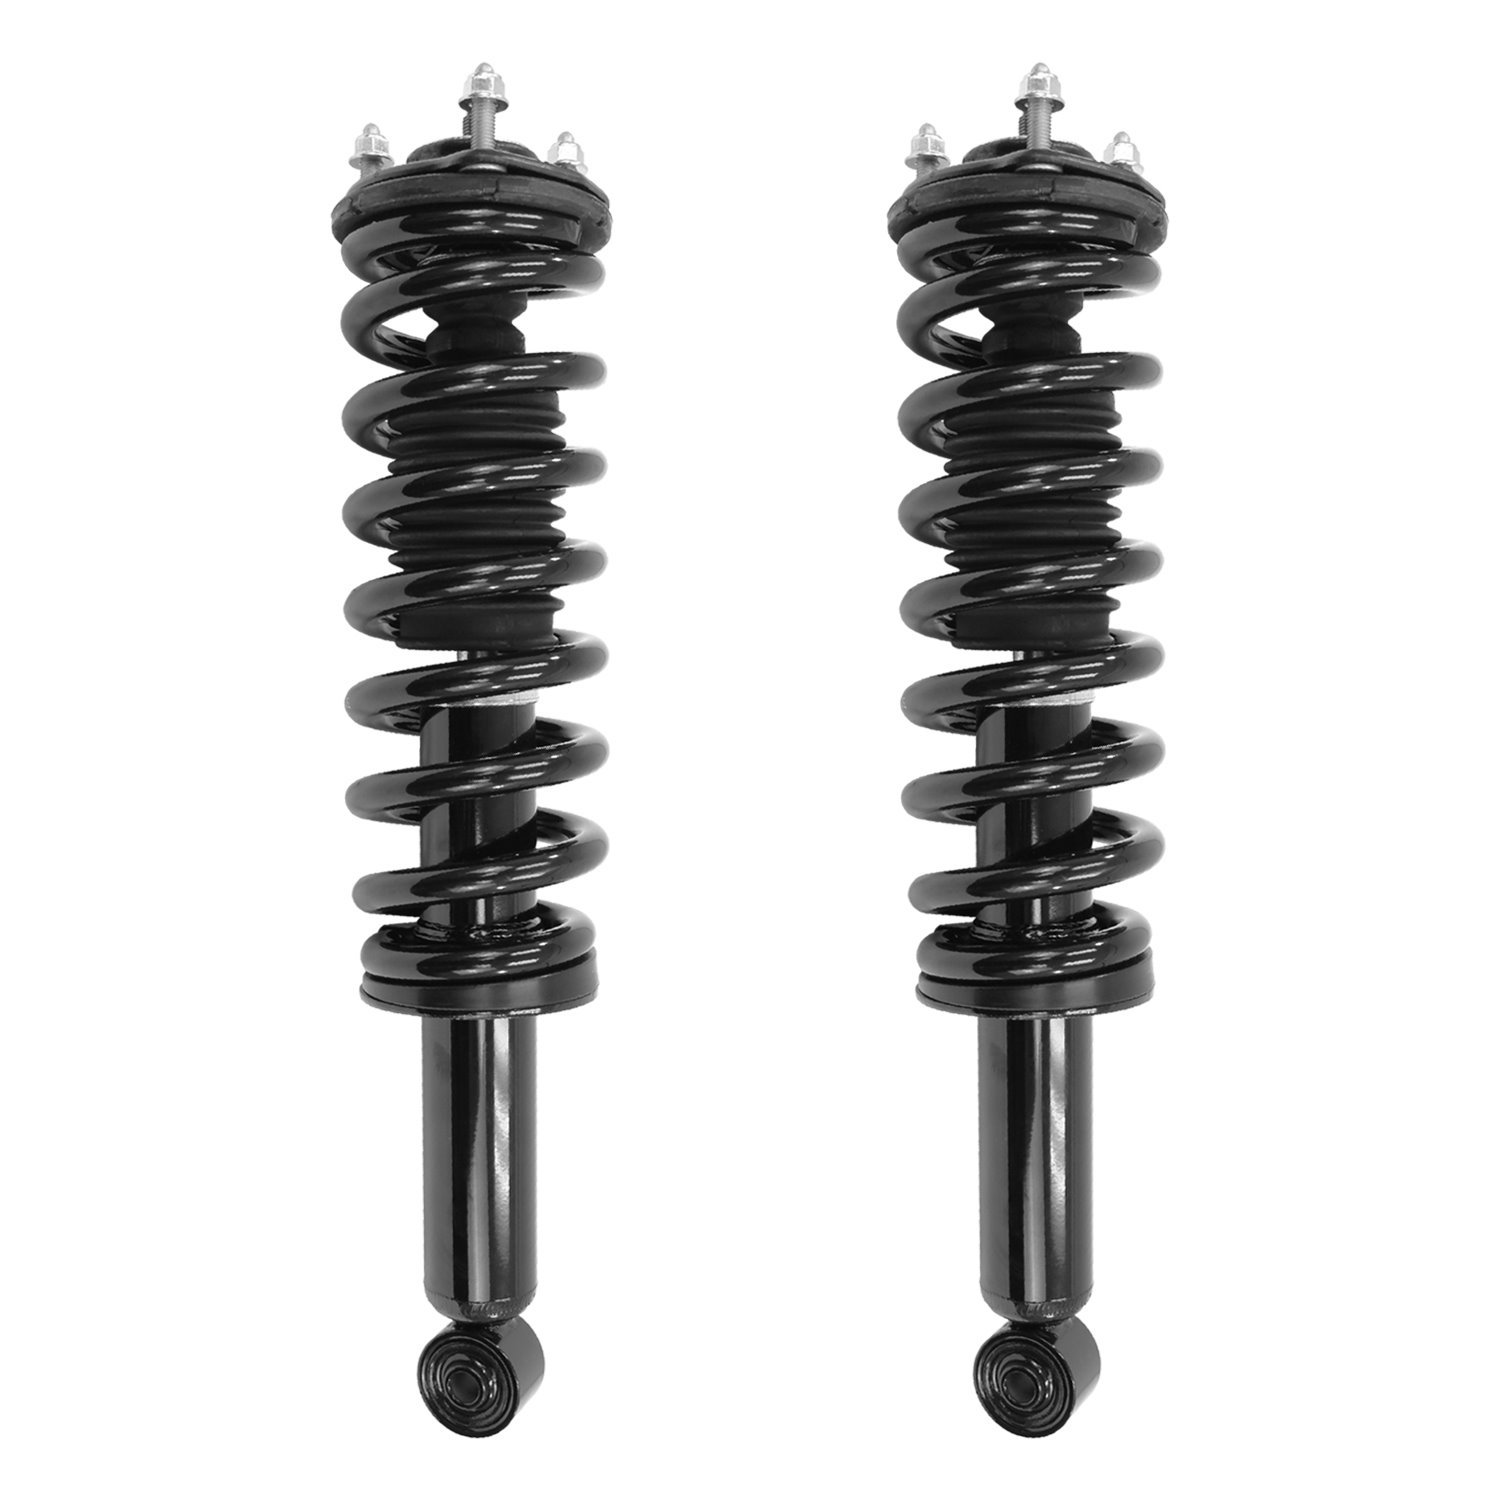 2-13550-001 Front Suspension Strut & Coil Spring Assemby Set Fits Select Chevy Colorado, GMC Canyon